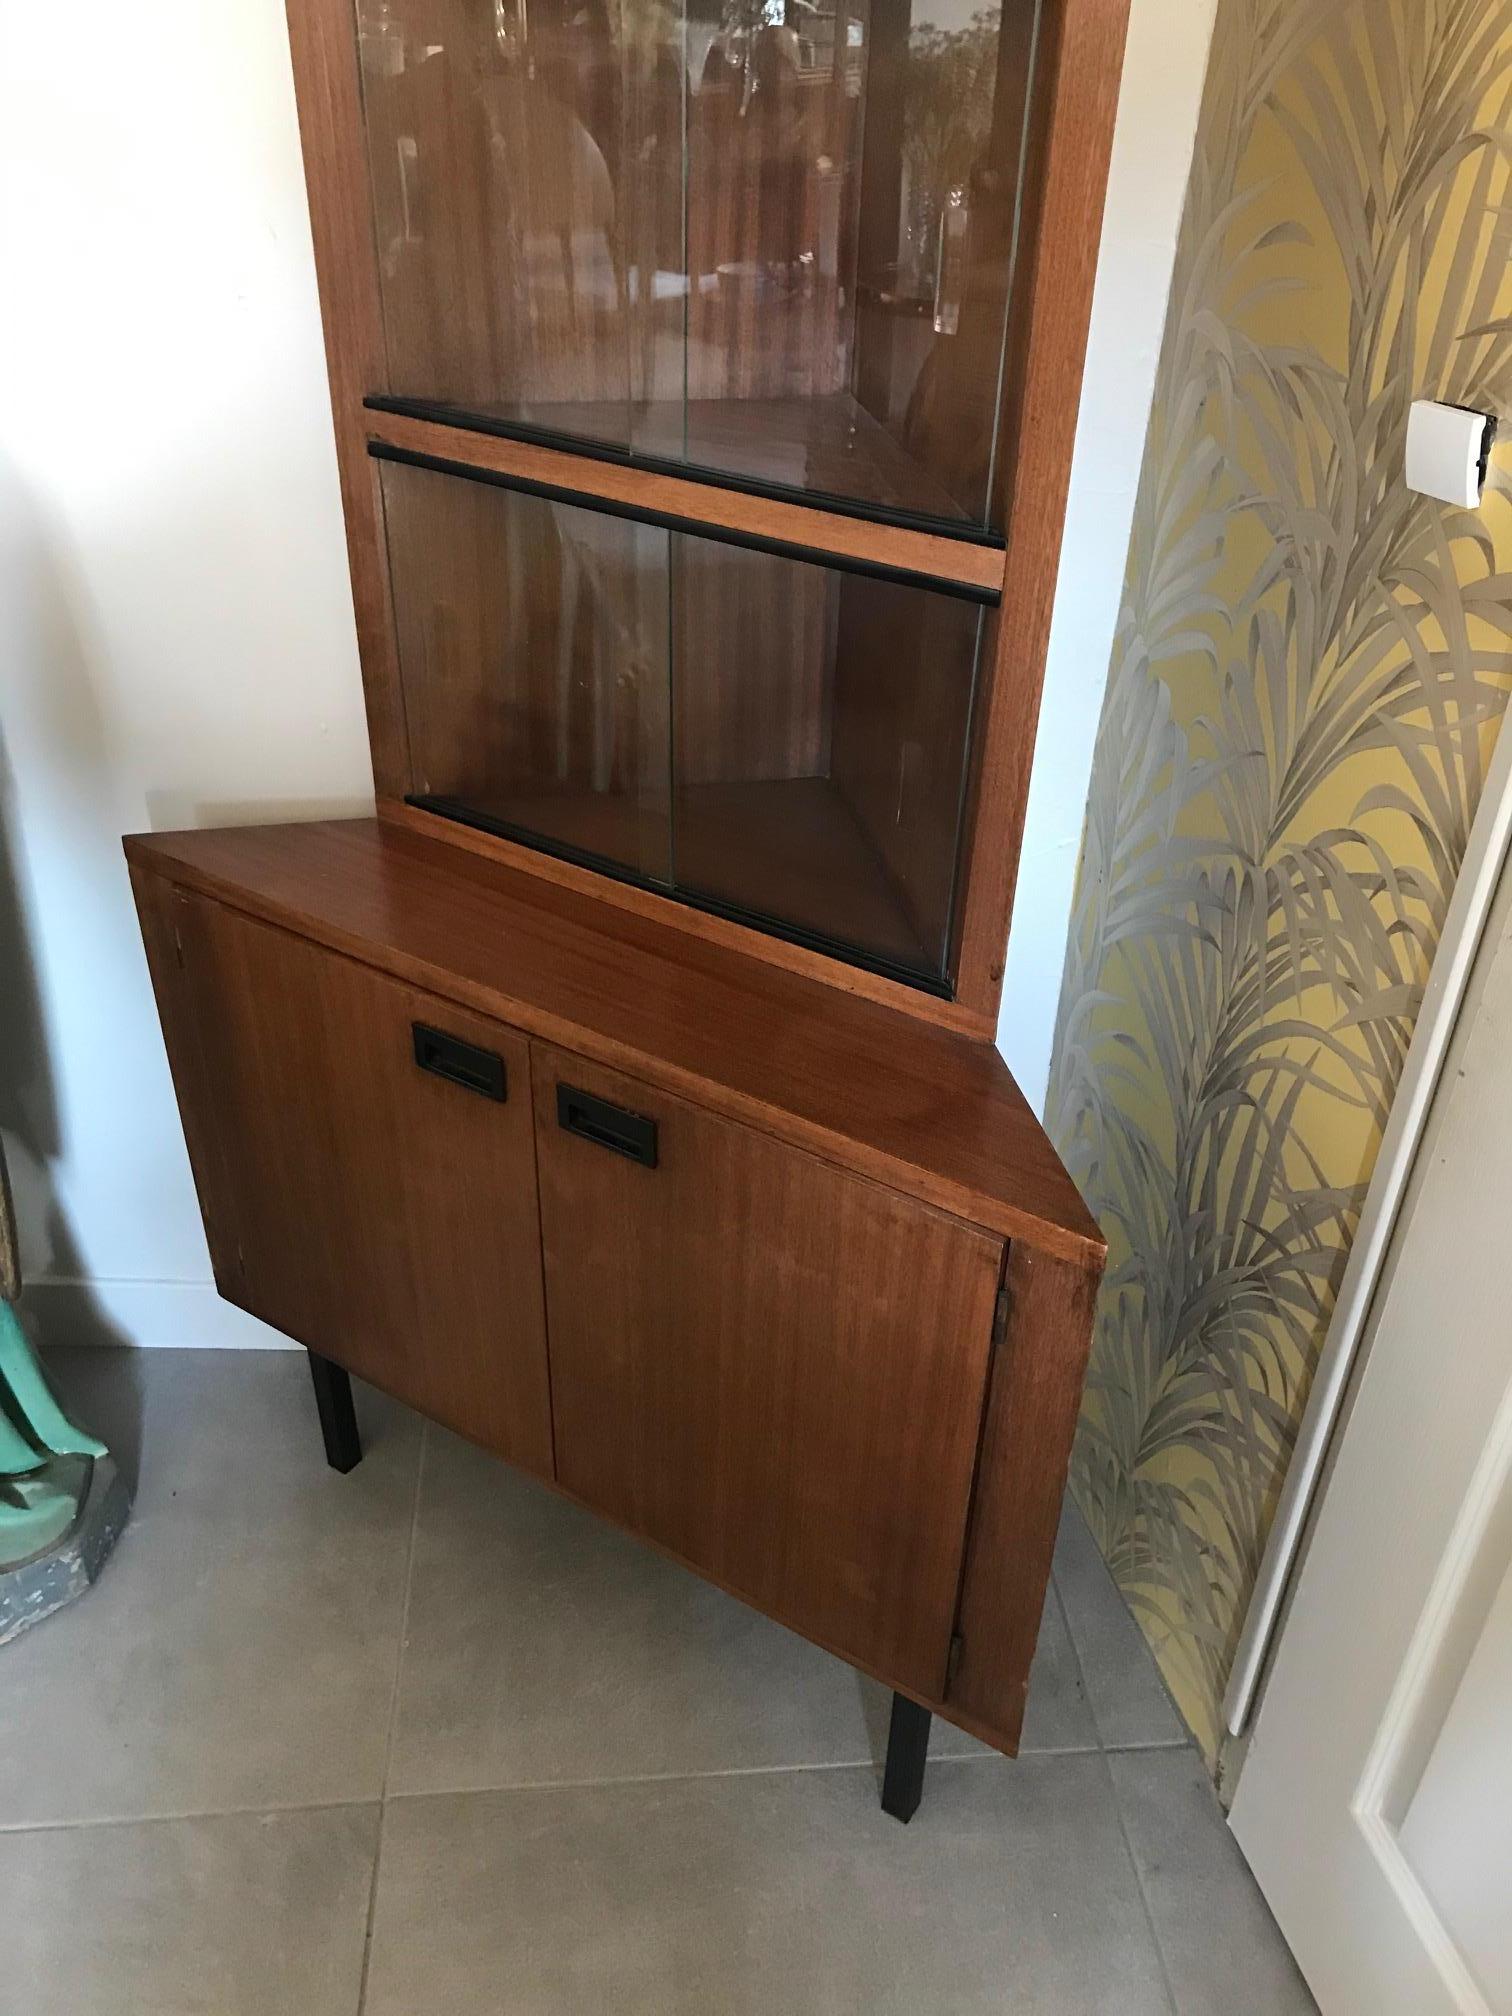 Very nice 20th century French corner cabinet from the 1960s.
Three shelves on the top part, two has sliding glass doors.
On the bottom part, two large doors.
Good quality and condition.